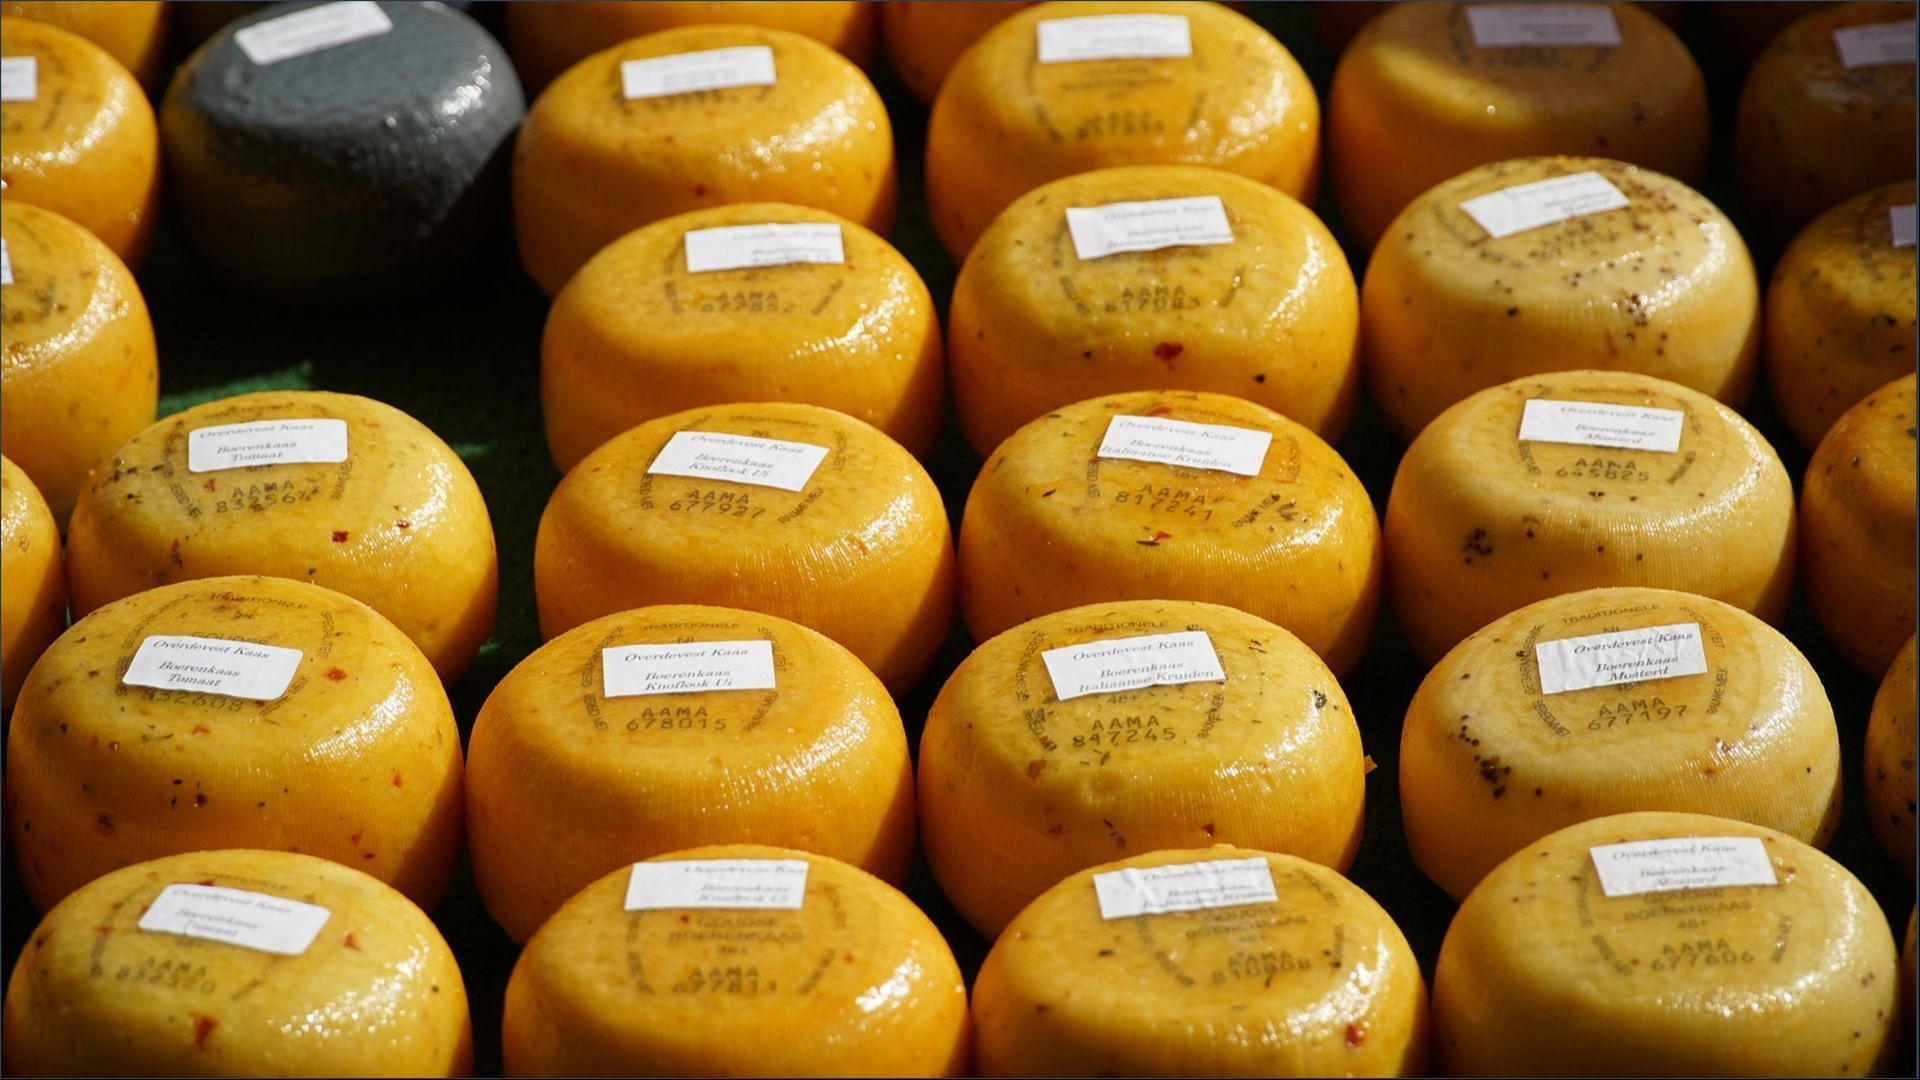 Raw Farms recalls its Cheddar Cheese Reason, affected varieties, and more